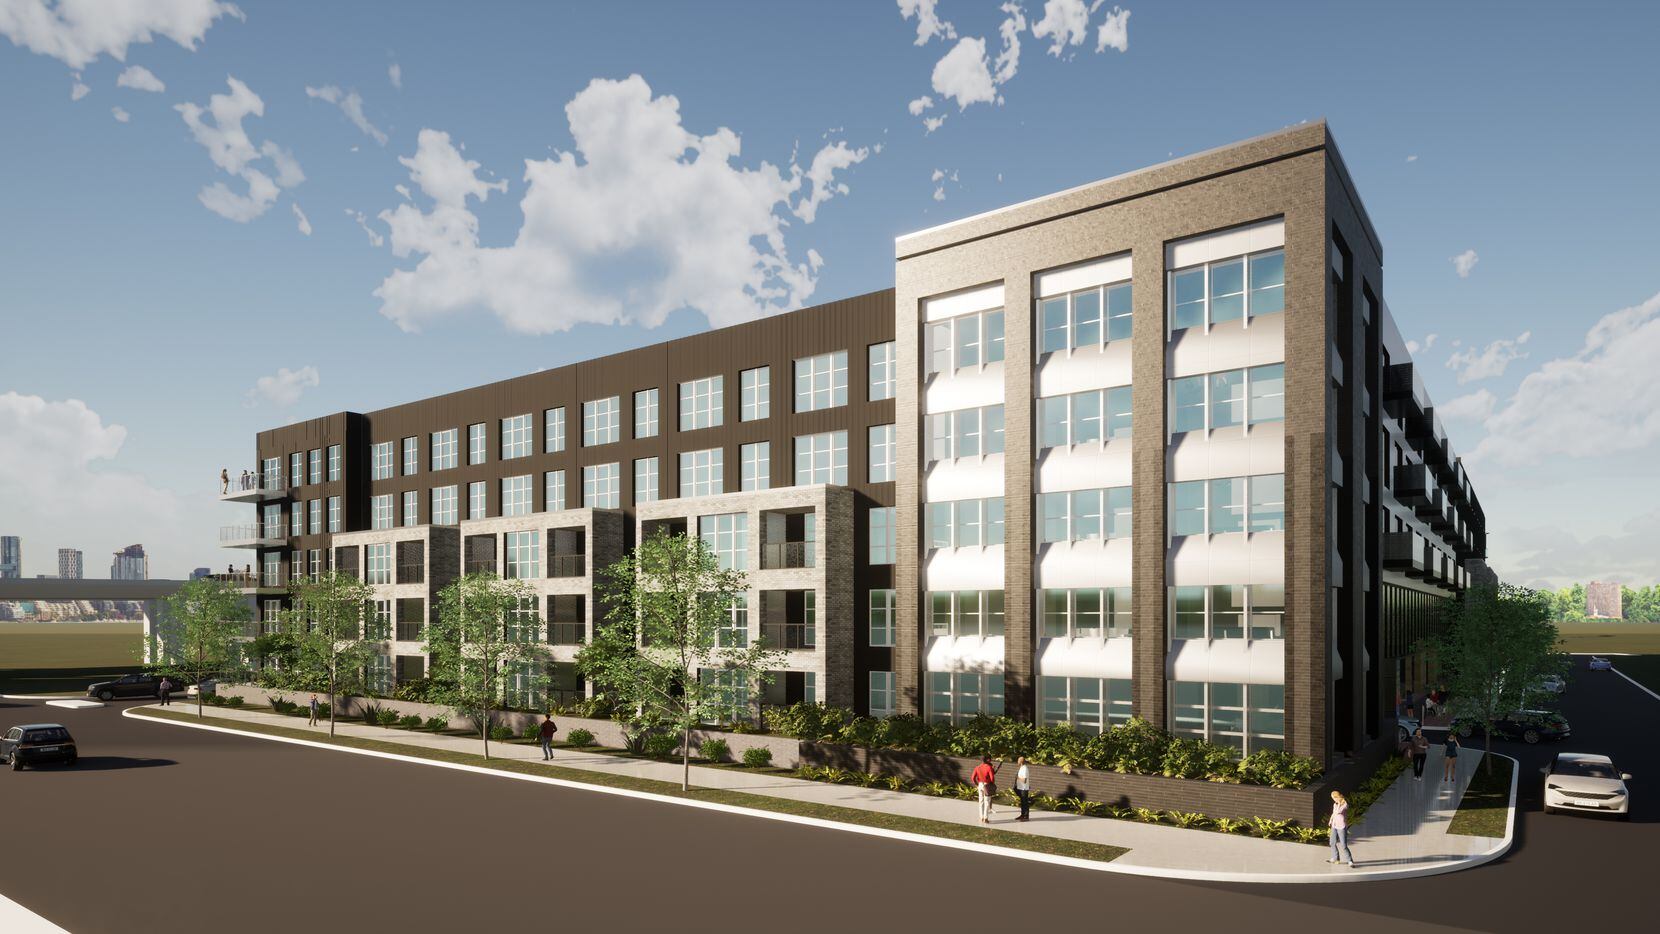 The Banyan Flats apartments are being built on Beckley Avenue near Interstate 30.